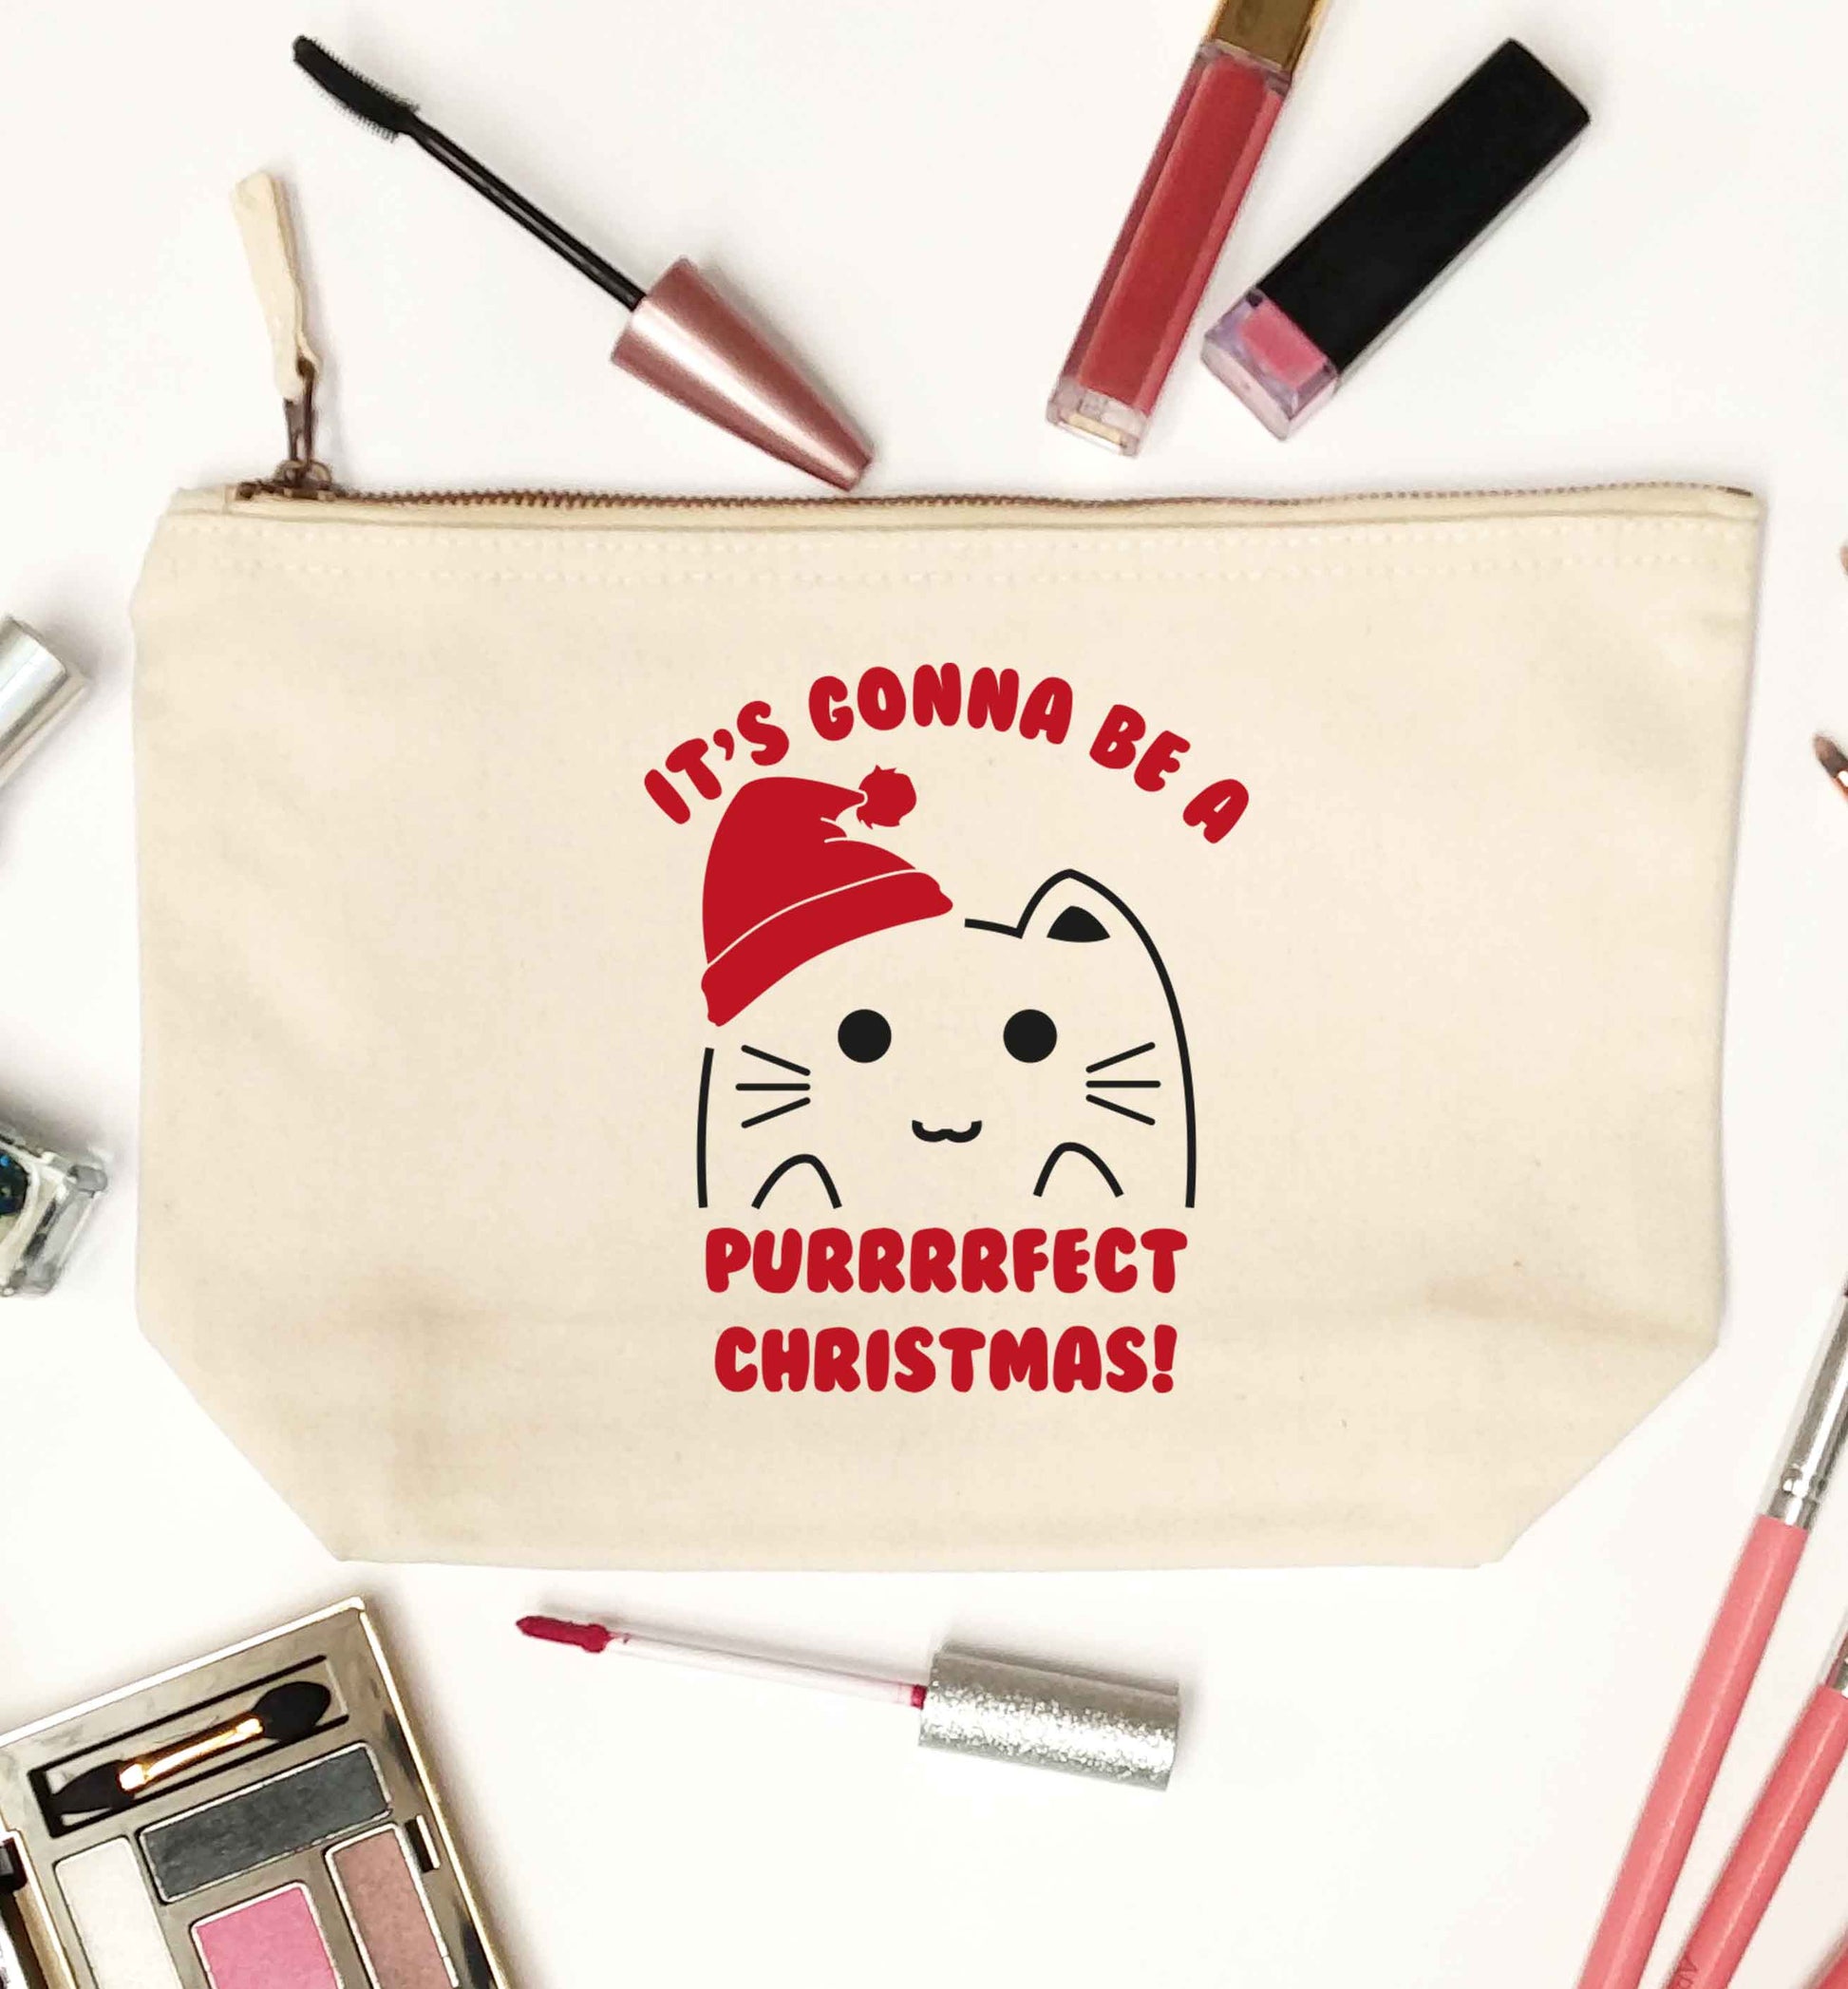 It's going to be a purrfect Christmas natural makeup bag